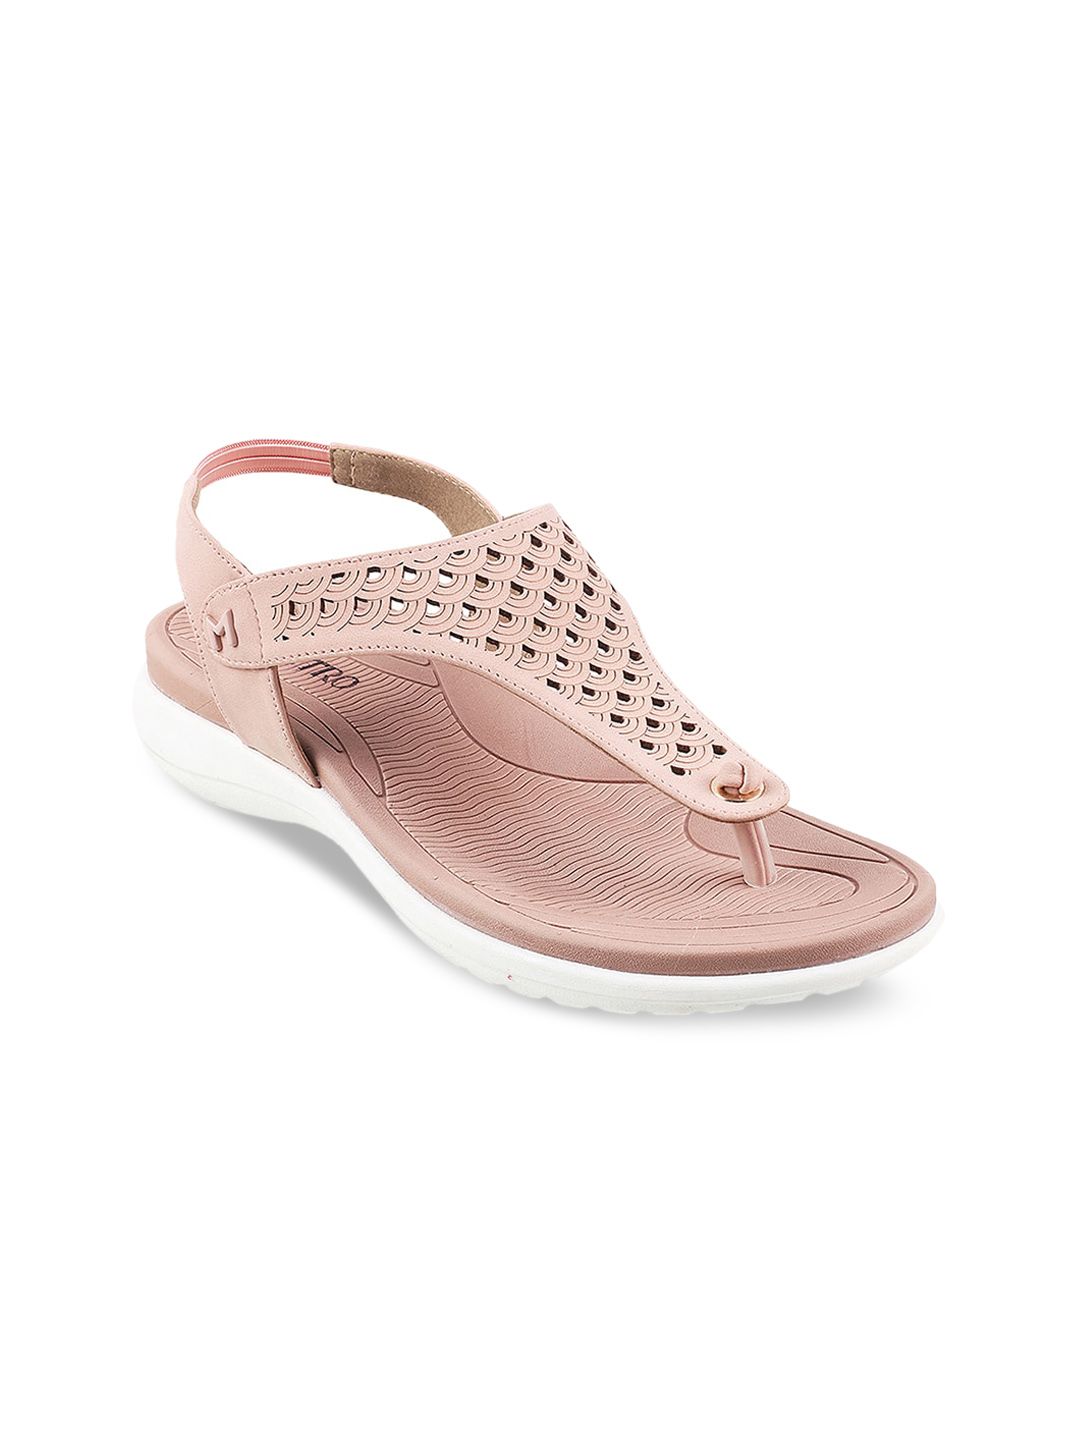 Metro Women Pink Open Toe Flats with Laser Cuts Price in India